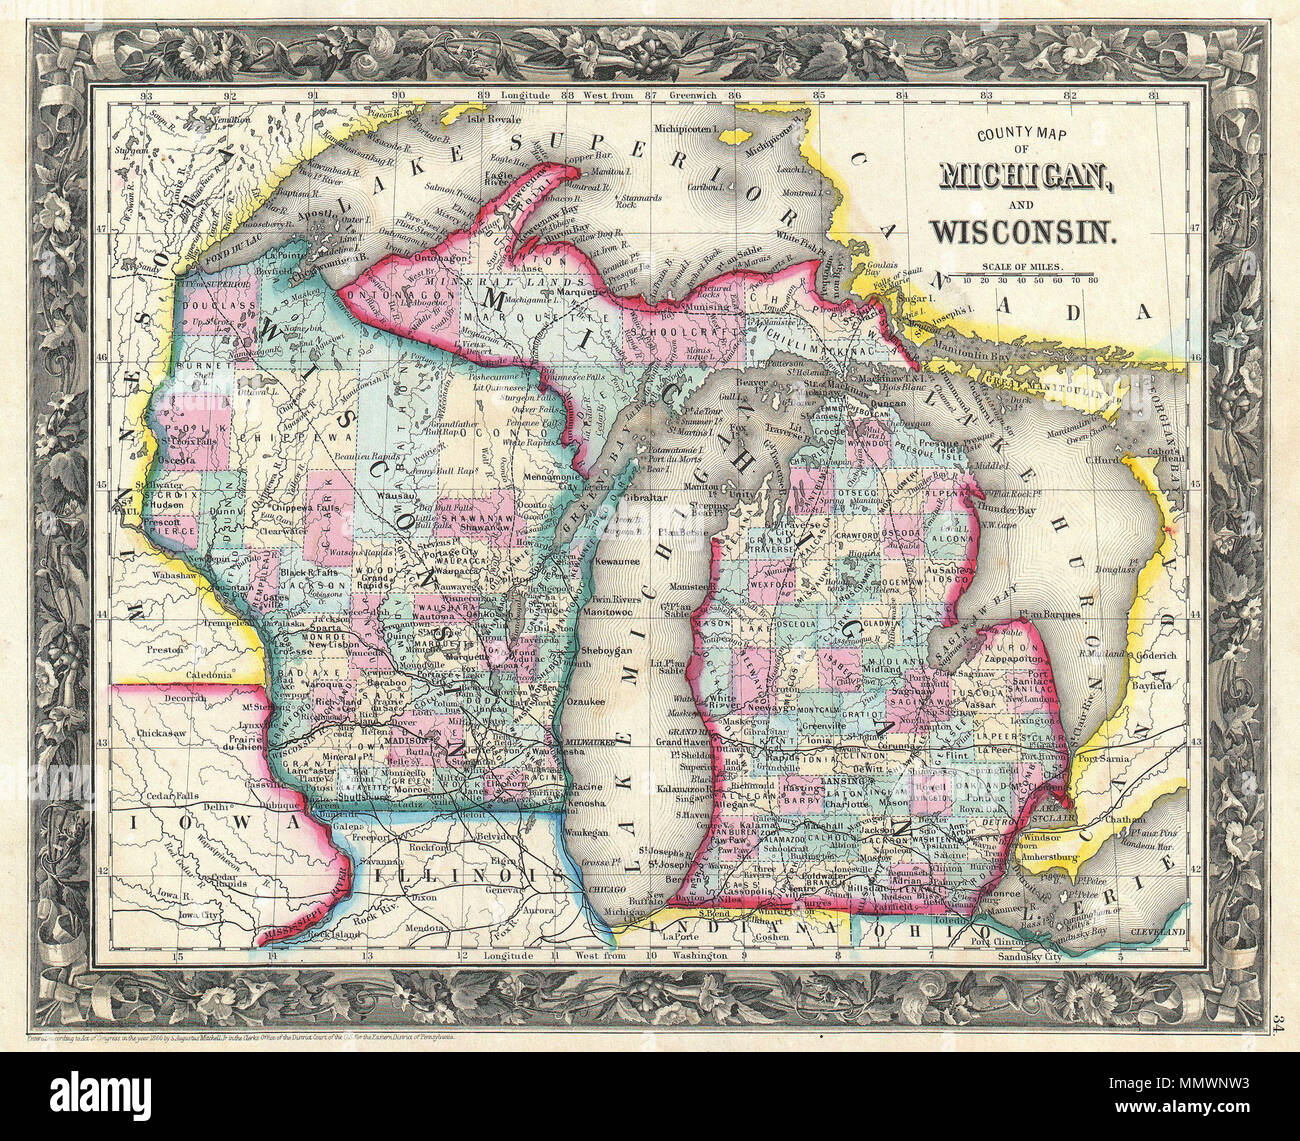 English: A beautiful example of the first edition of S. A. Mitchell's 1860  map of Michigan and Wisconsin. Depicts both states in considerable detail  with color coding at the county level.